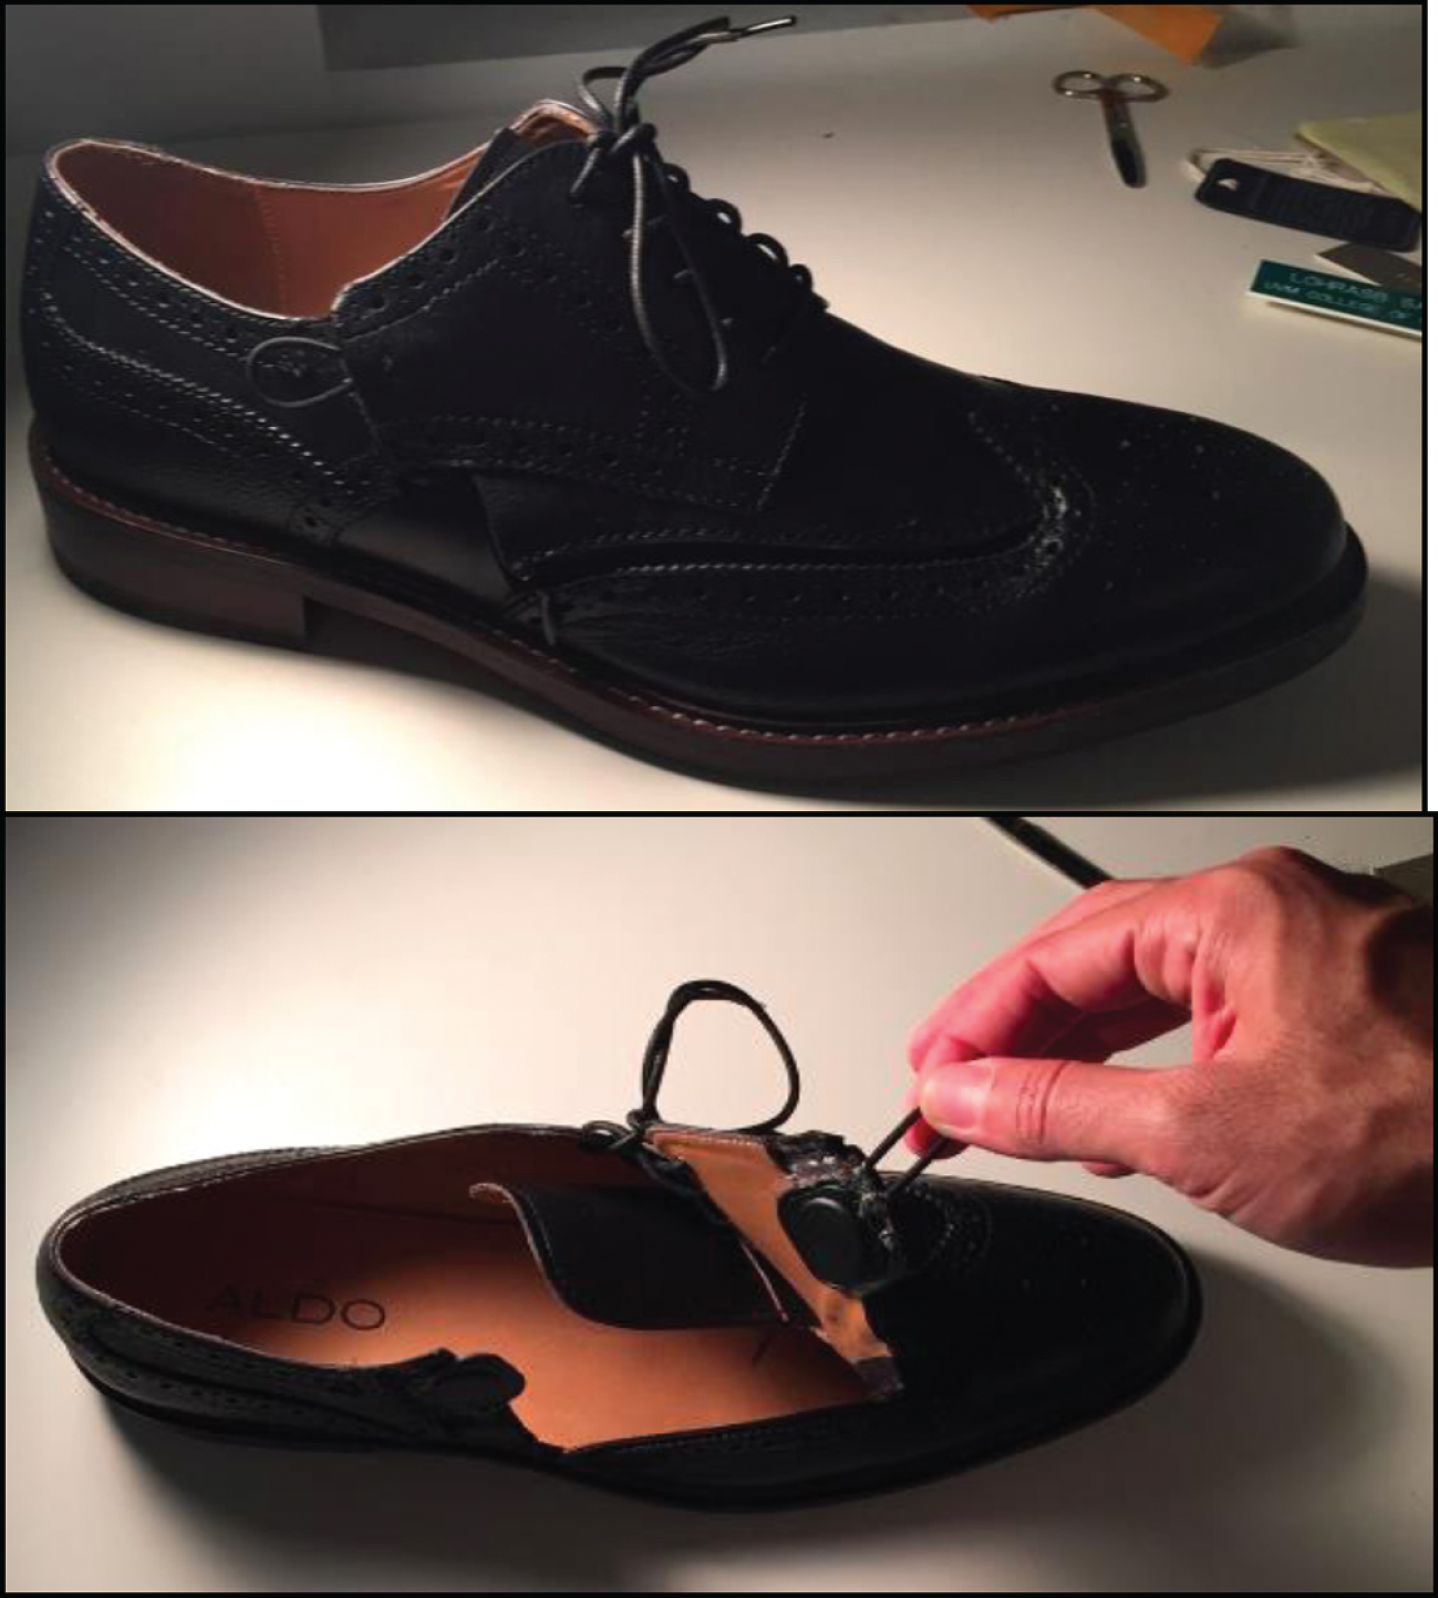 Assessing and footwear needs in Parkinson's disease—design thinking in neurology - IOS Press